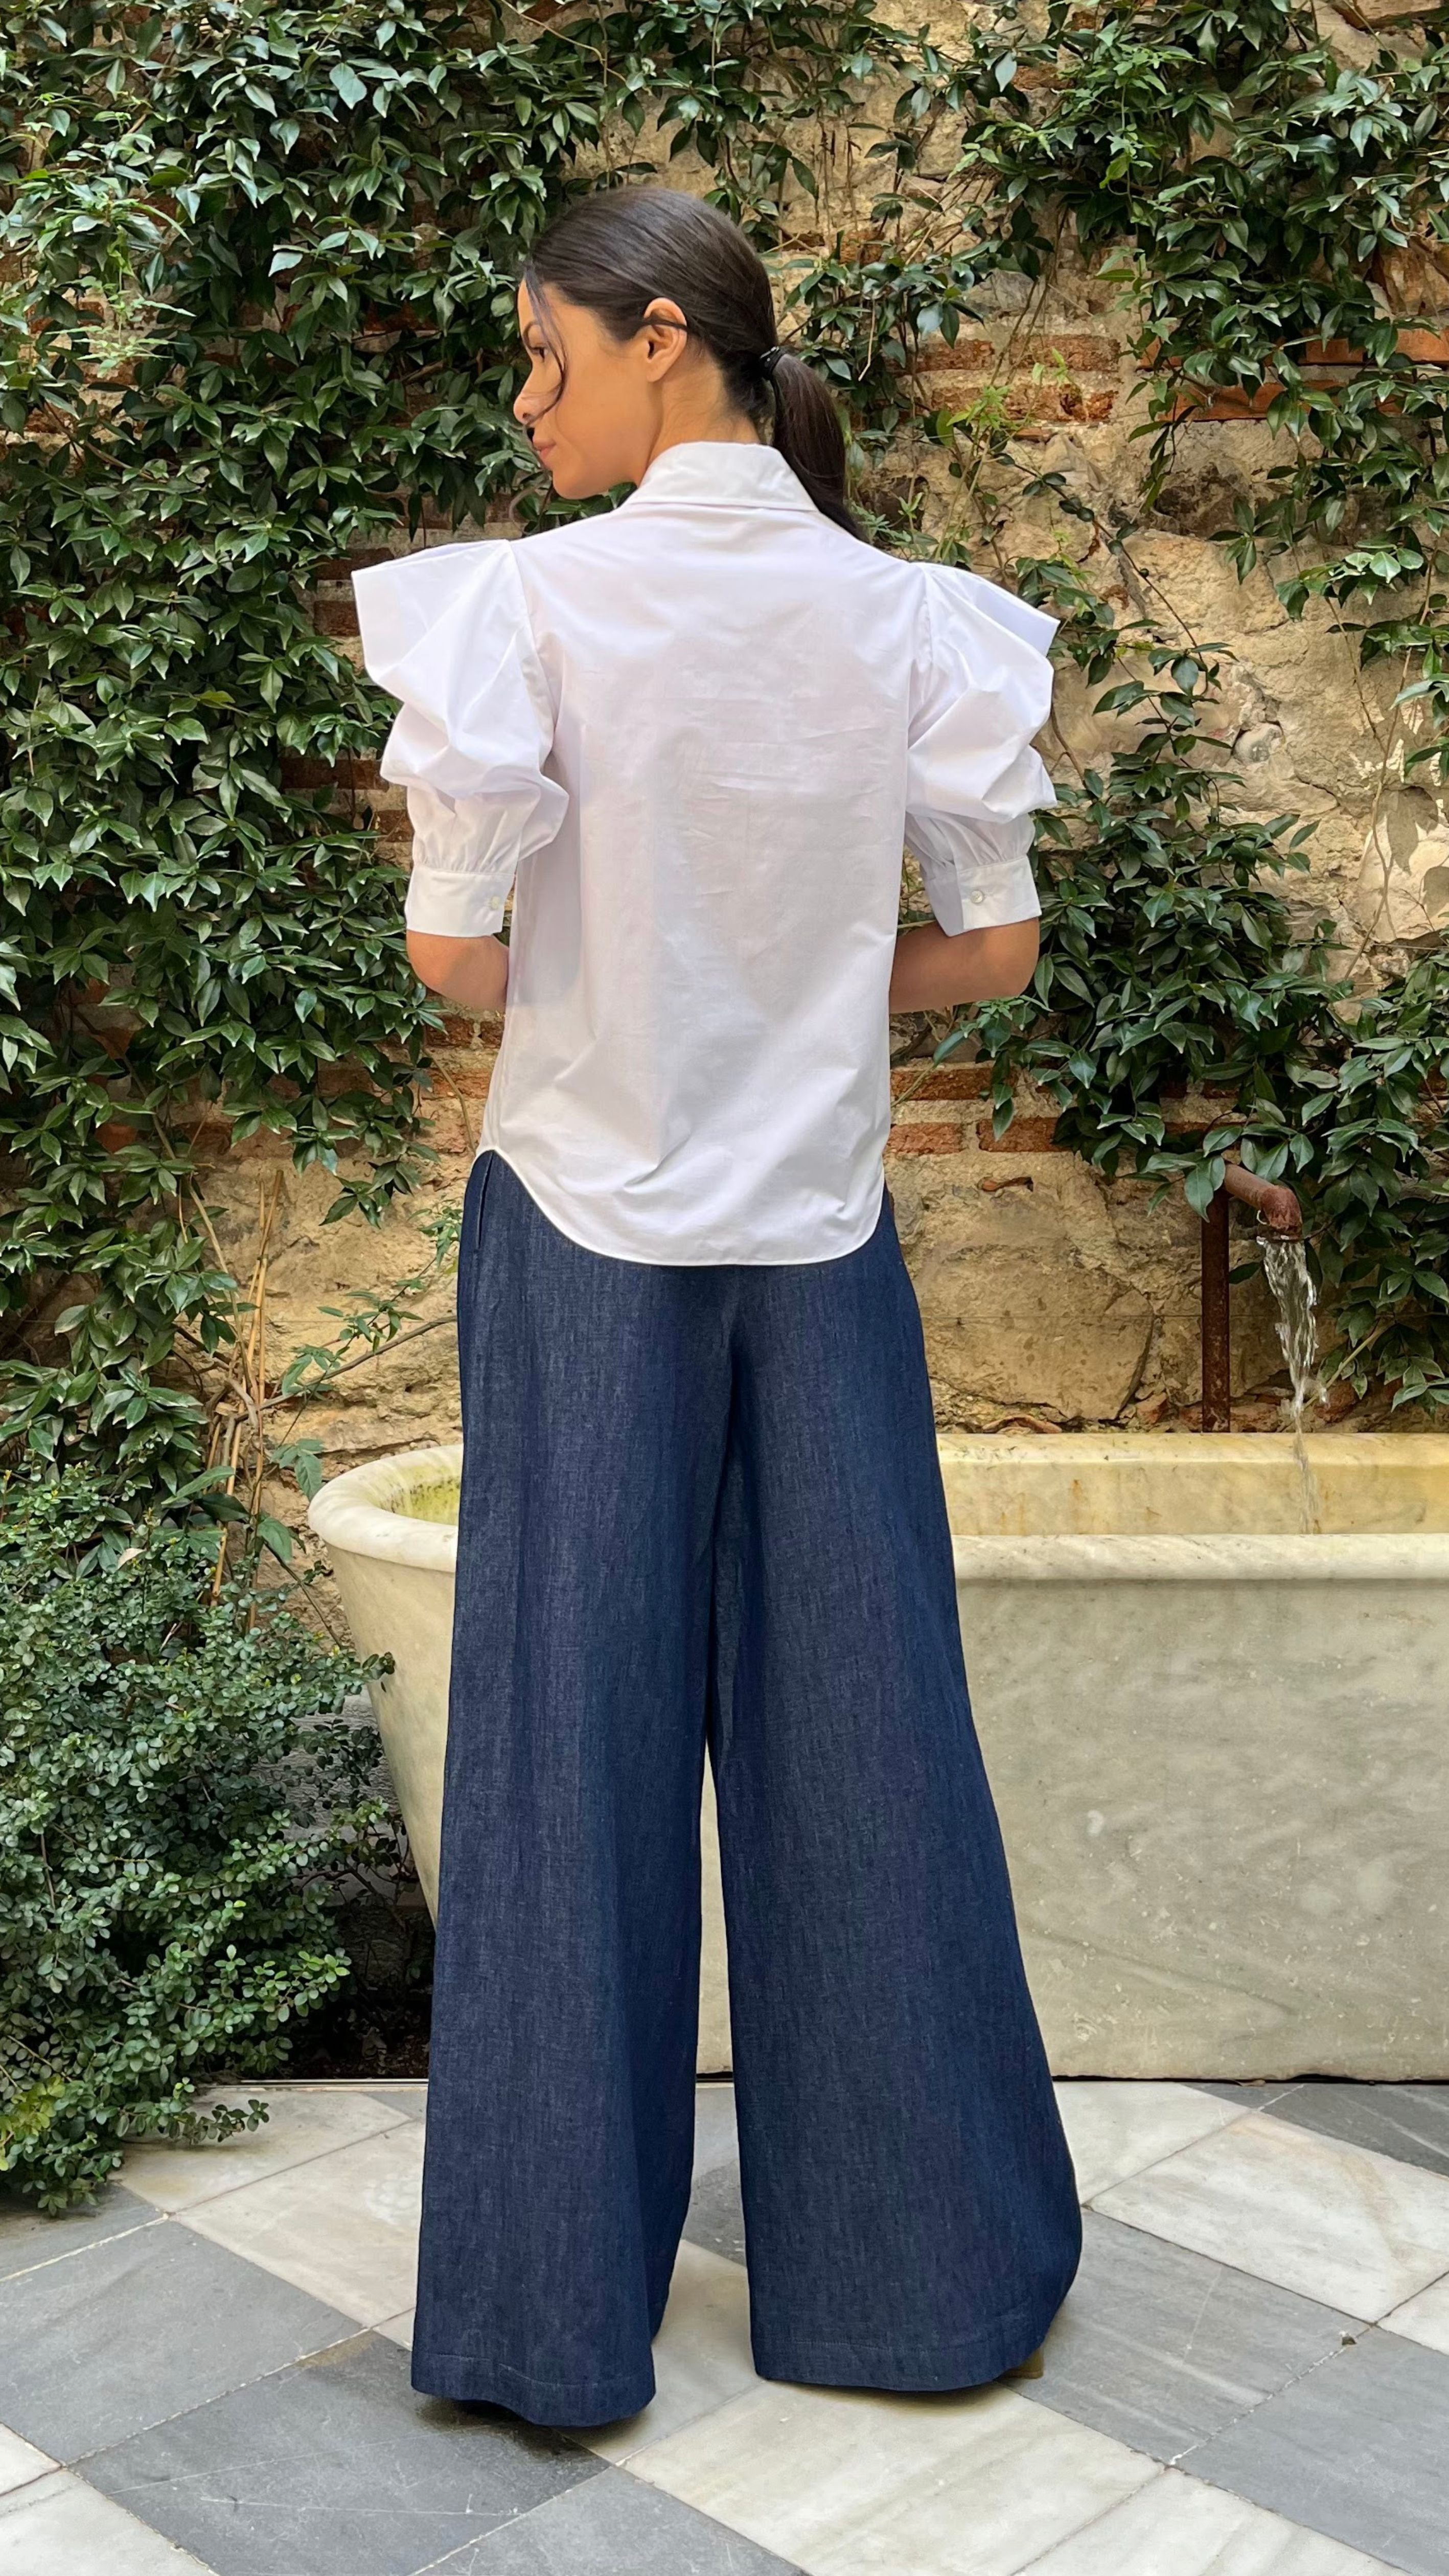 Rochas Paris Cotton Poplin Short Sleeved Shirt. A button up blouse in lightweight cotton it has two front pockets and puffed sleeves. Photo shown on model also wearing Rochas wide leg denim trousers from the back view